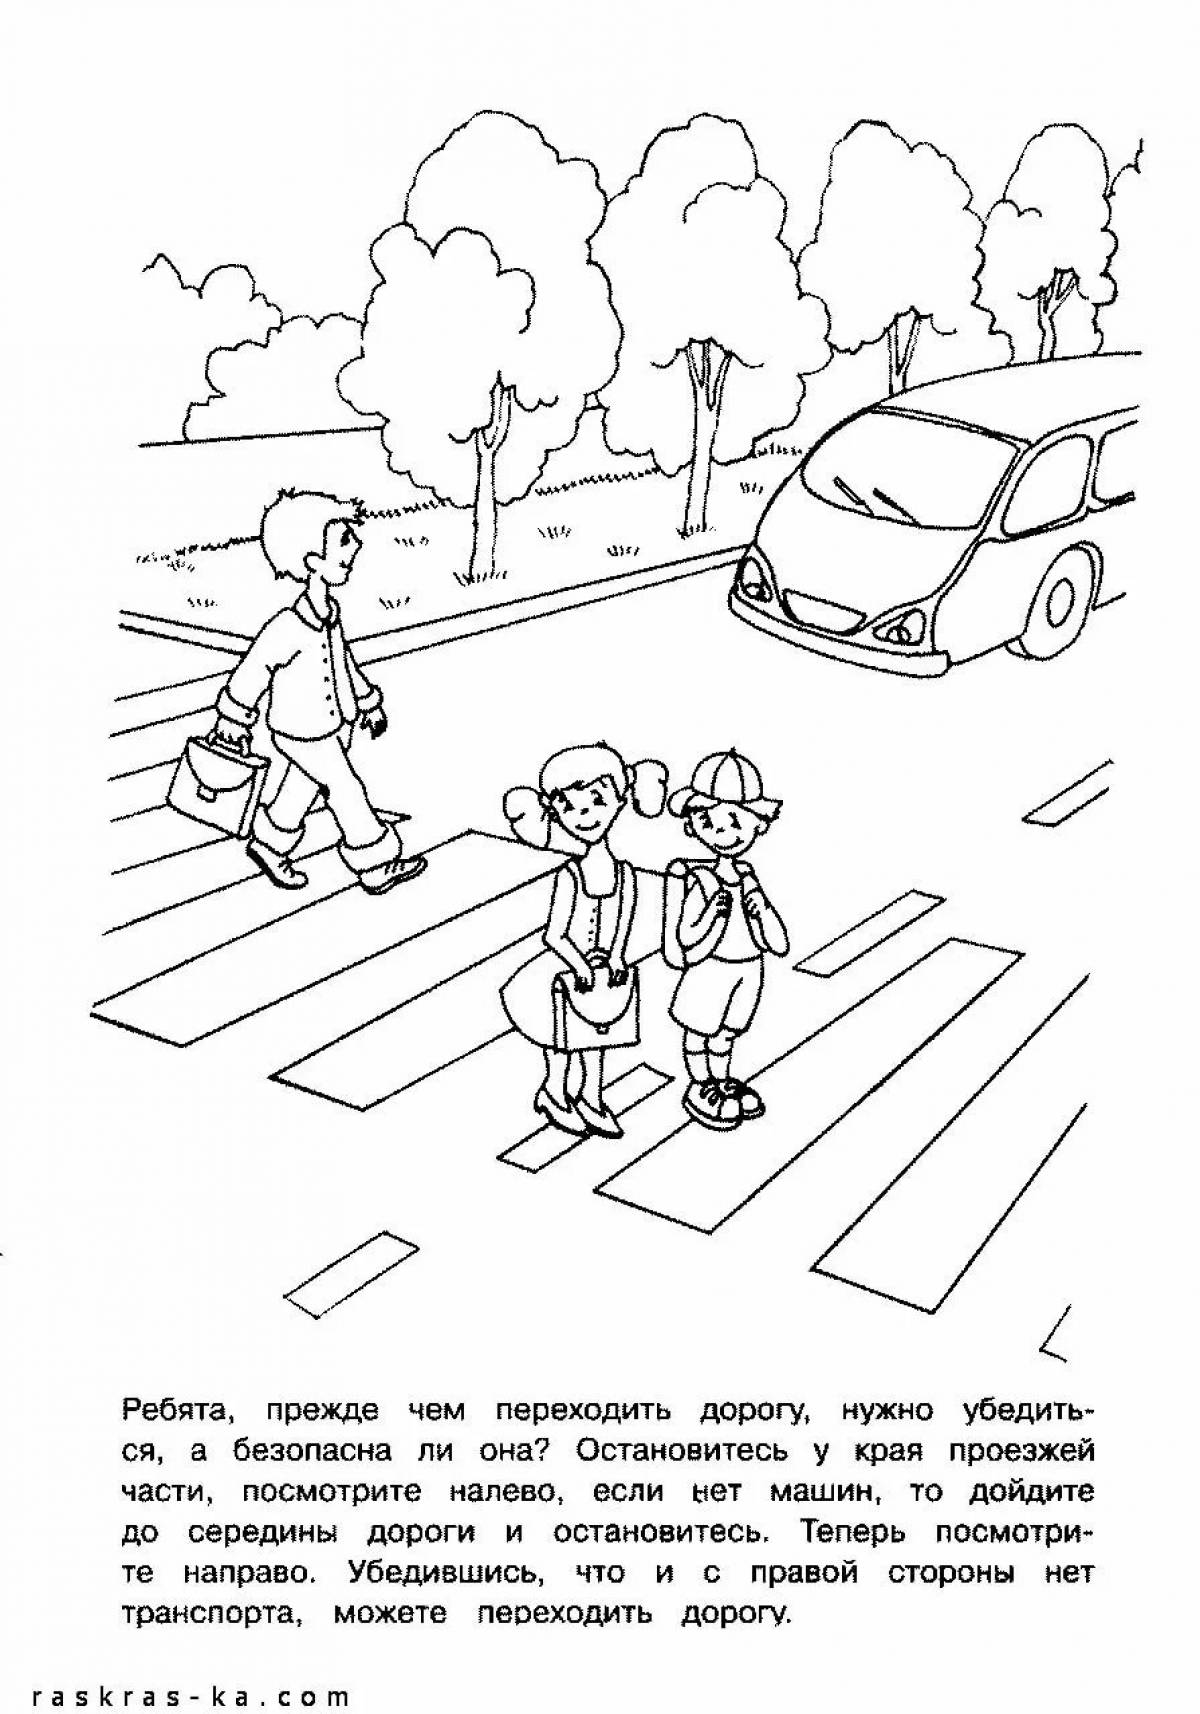 Fun road safety page for students